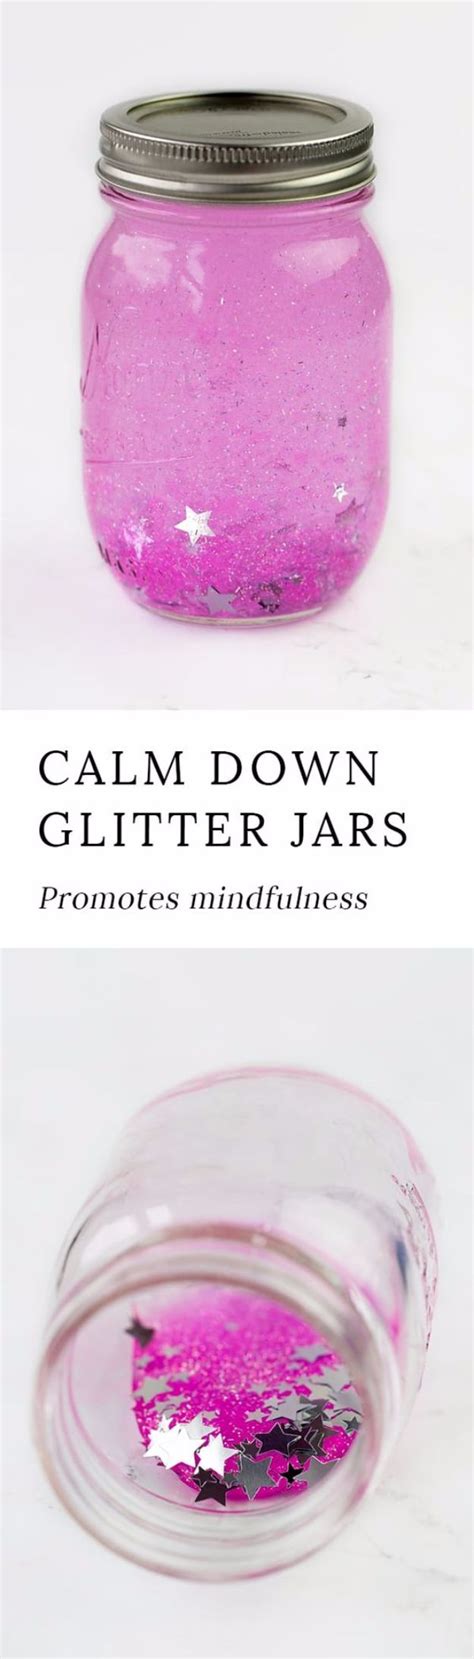 35 Diy Ideas With Glitter Diy Projects For Teens